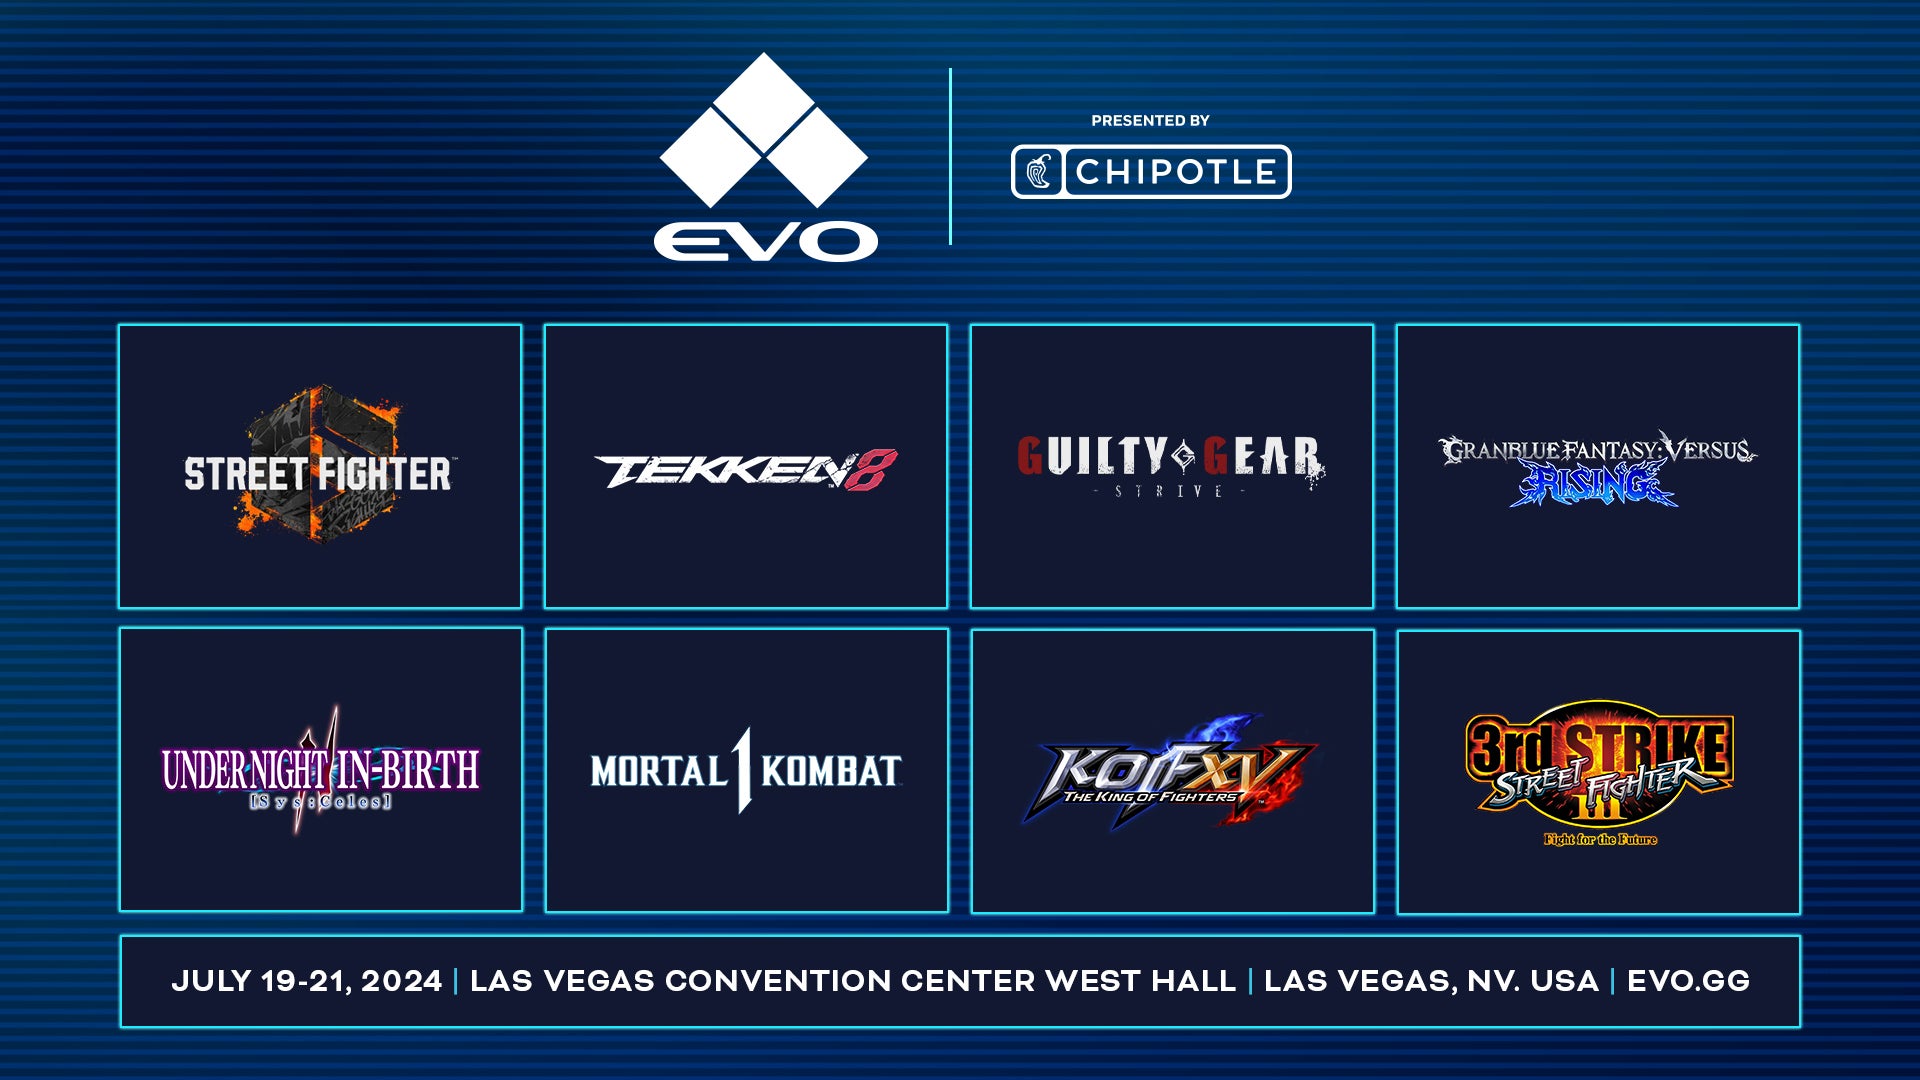 Evo 2024 sets the stage for another exciting year of fighting game